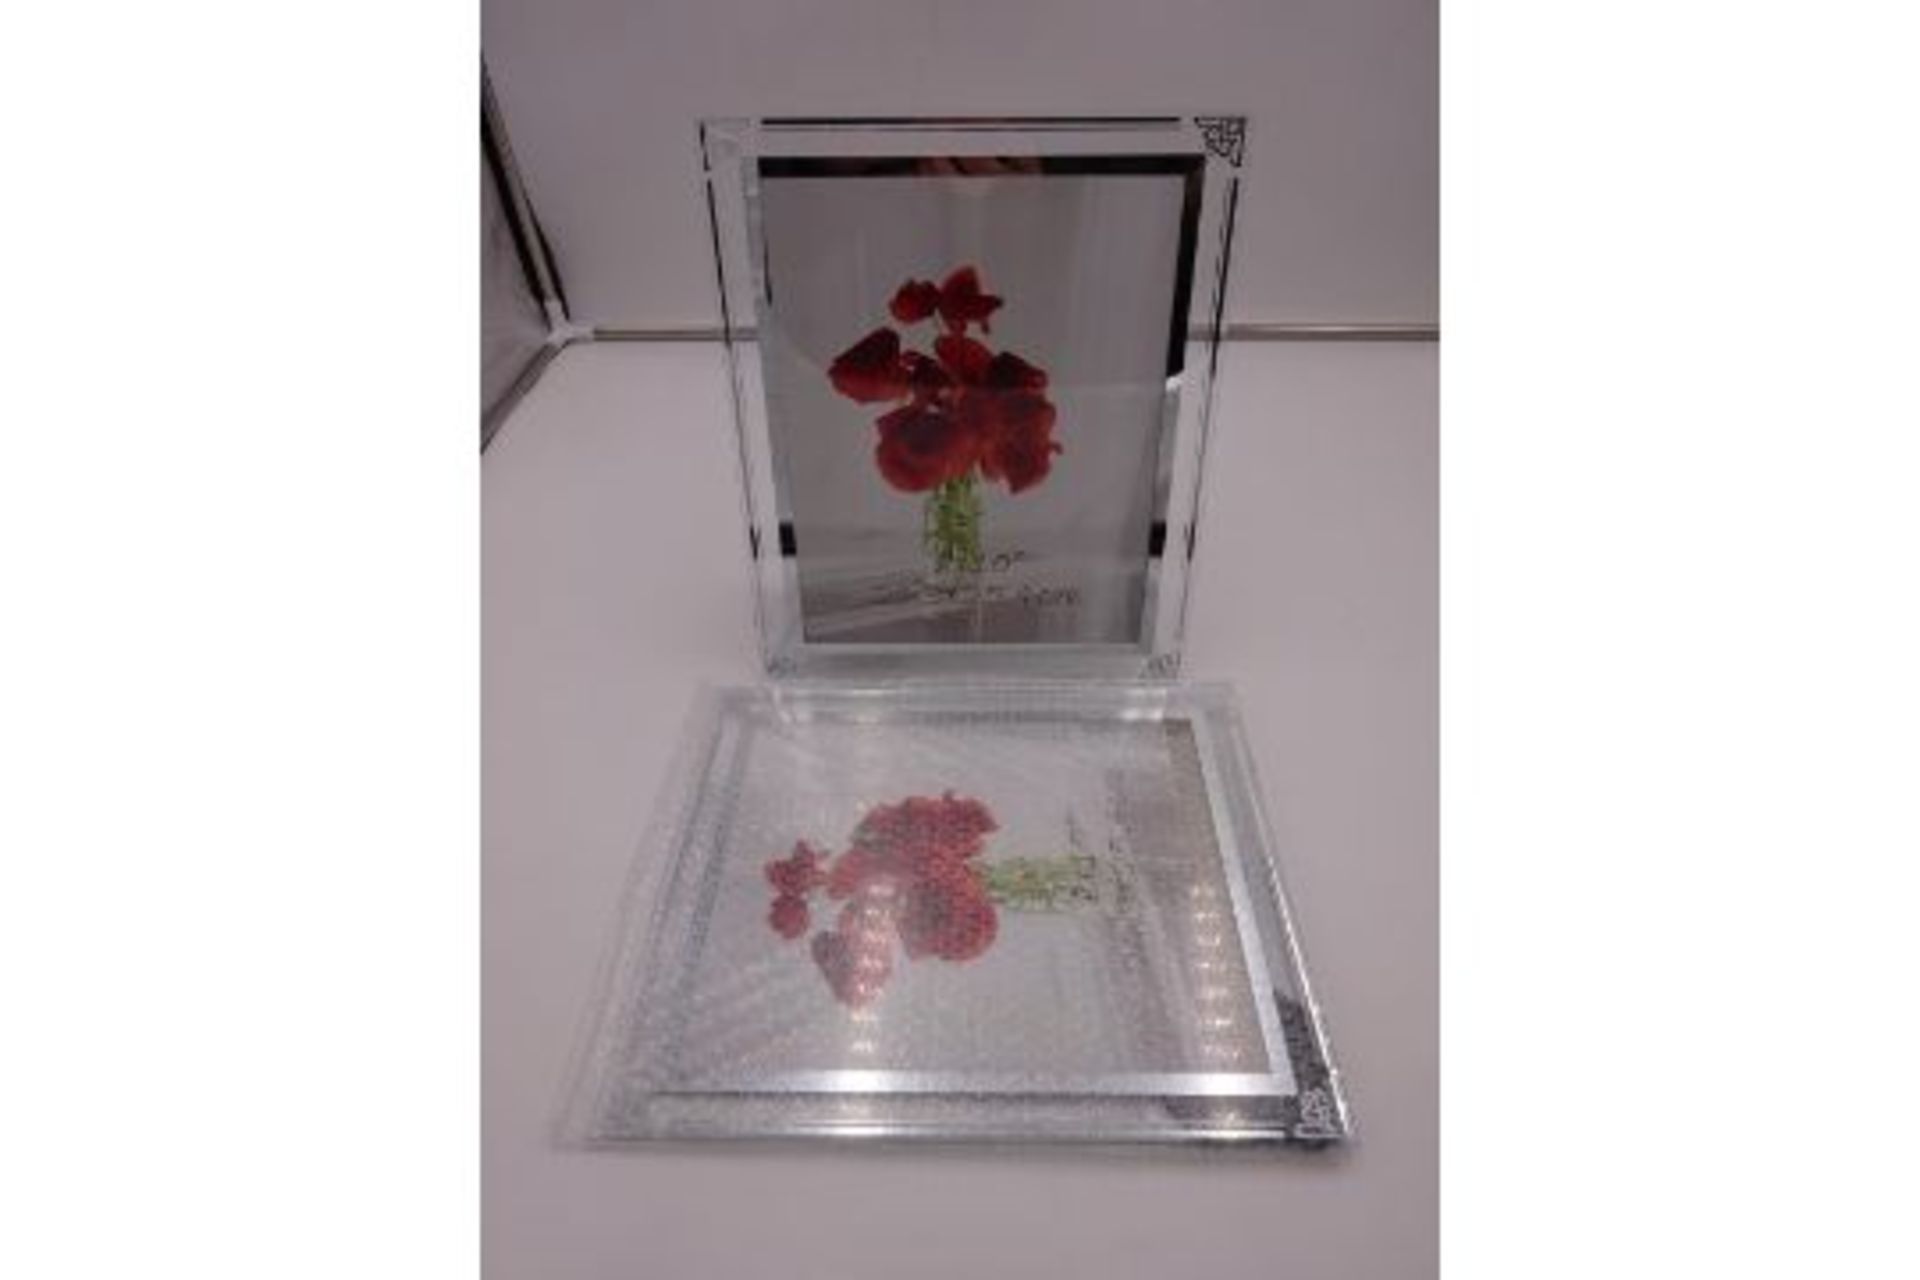 NEW - TWO 8 BY 10 INCH GLASS PHOTO FRAMES